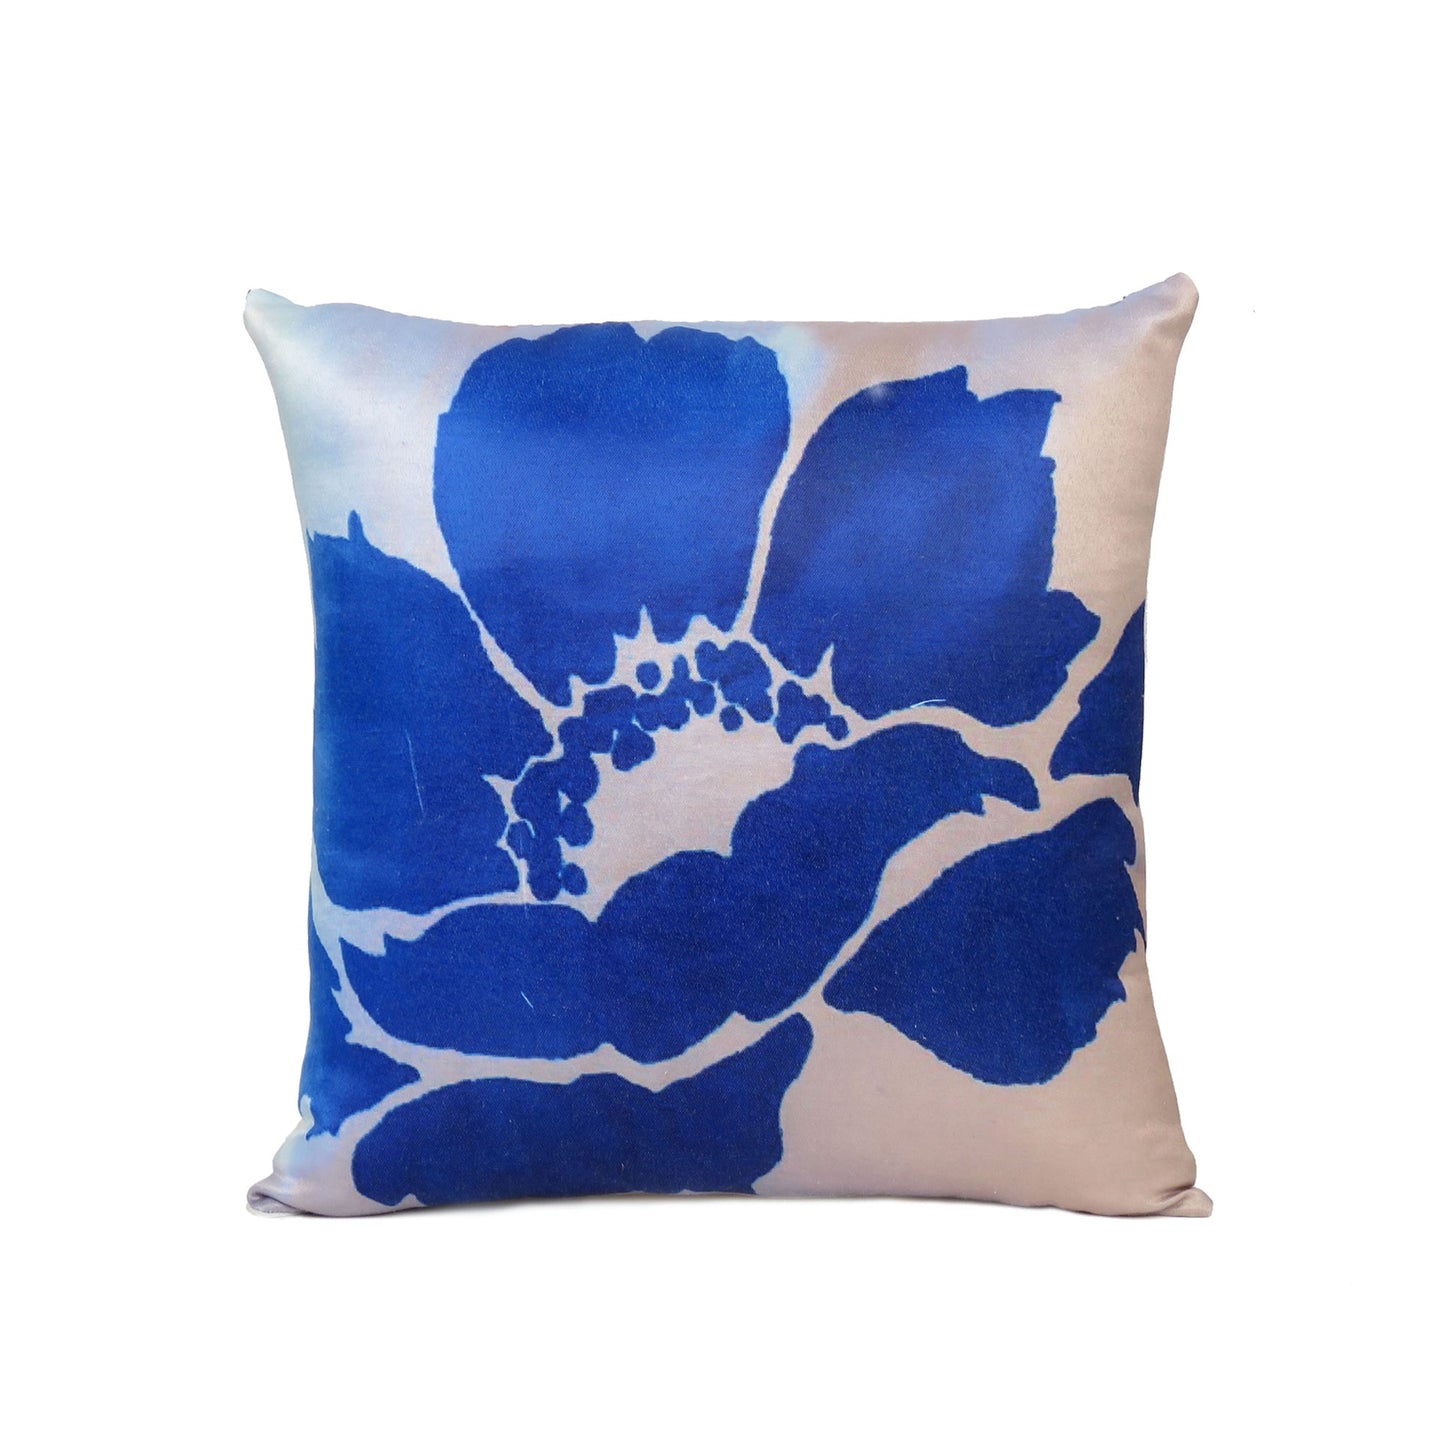 Blue Floral Printed Cushion Cover in Set of 2